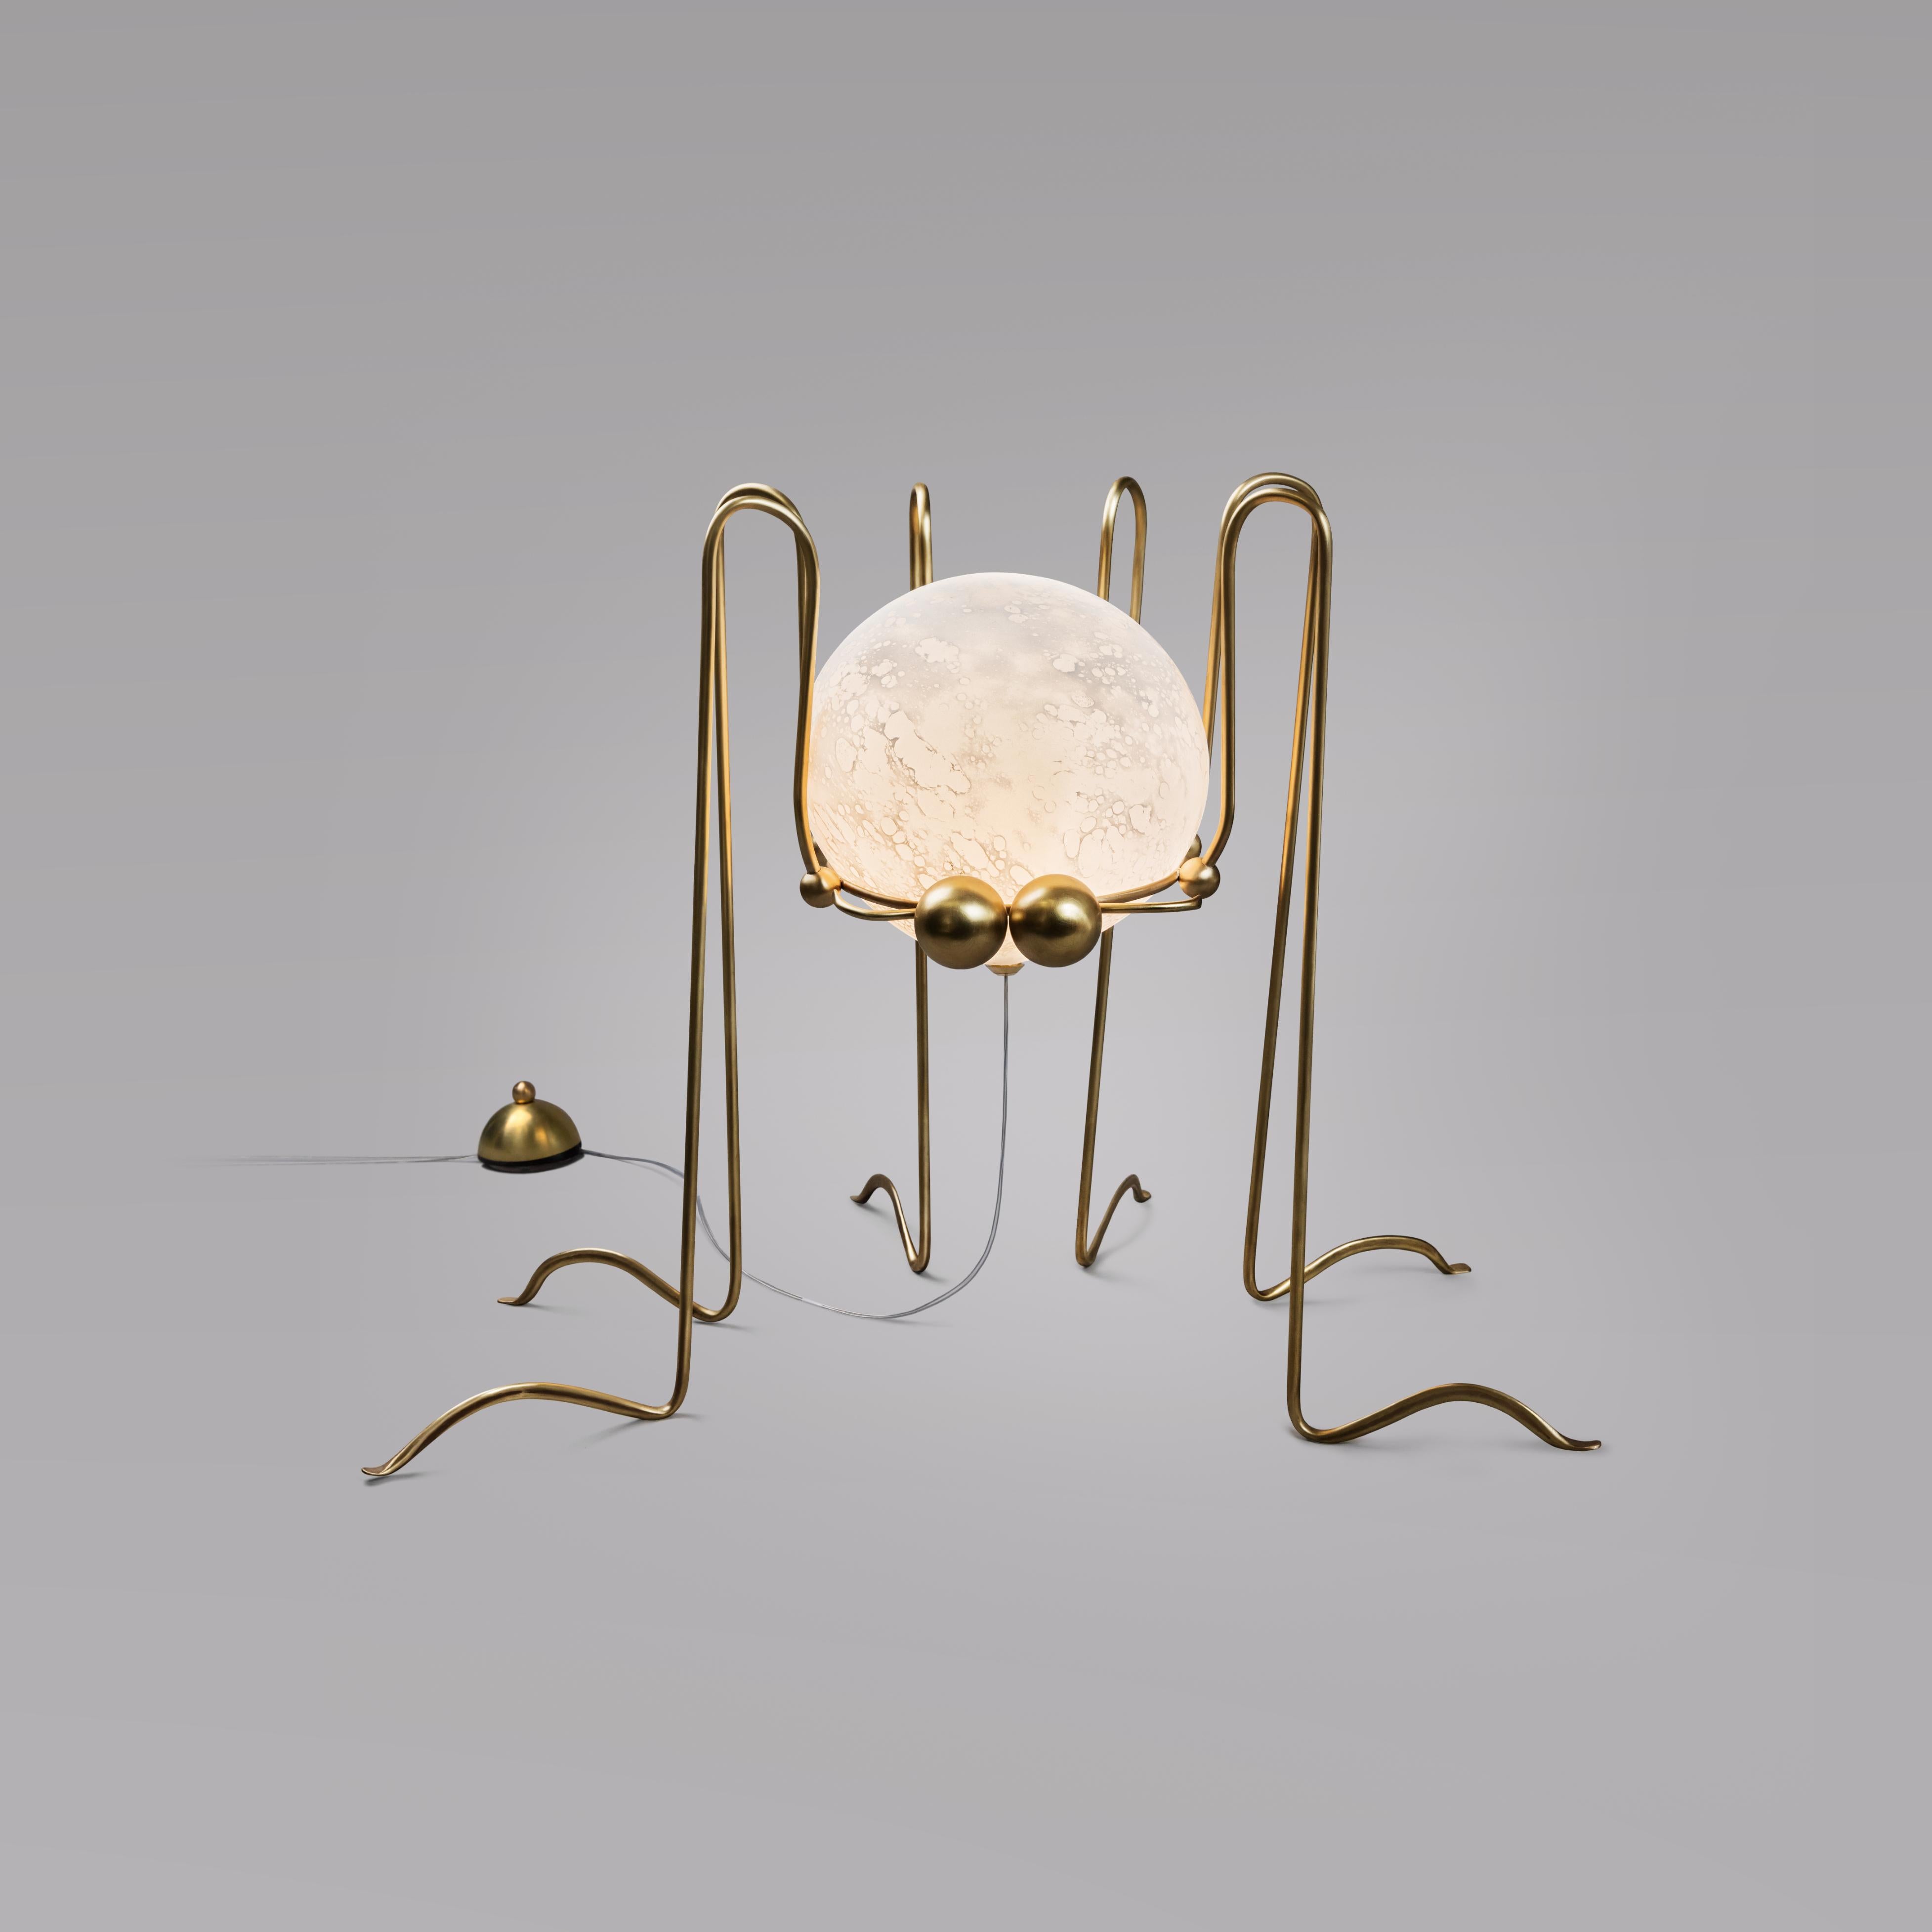 Spider, floor lamp sculpture, Vincent Darré and Ludovic Clément d’Armont
Blown glass, textile, brass
Dimensions: 55 x 37 x 37 cm.

Created in cooperation with designer Vincent Darré, insects are funny and original sculptures. They come from the